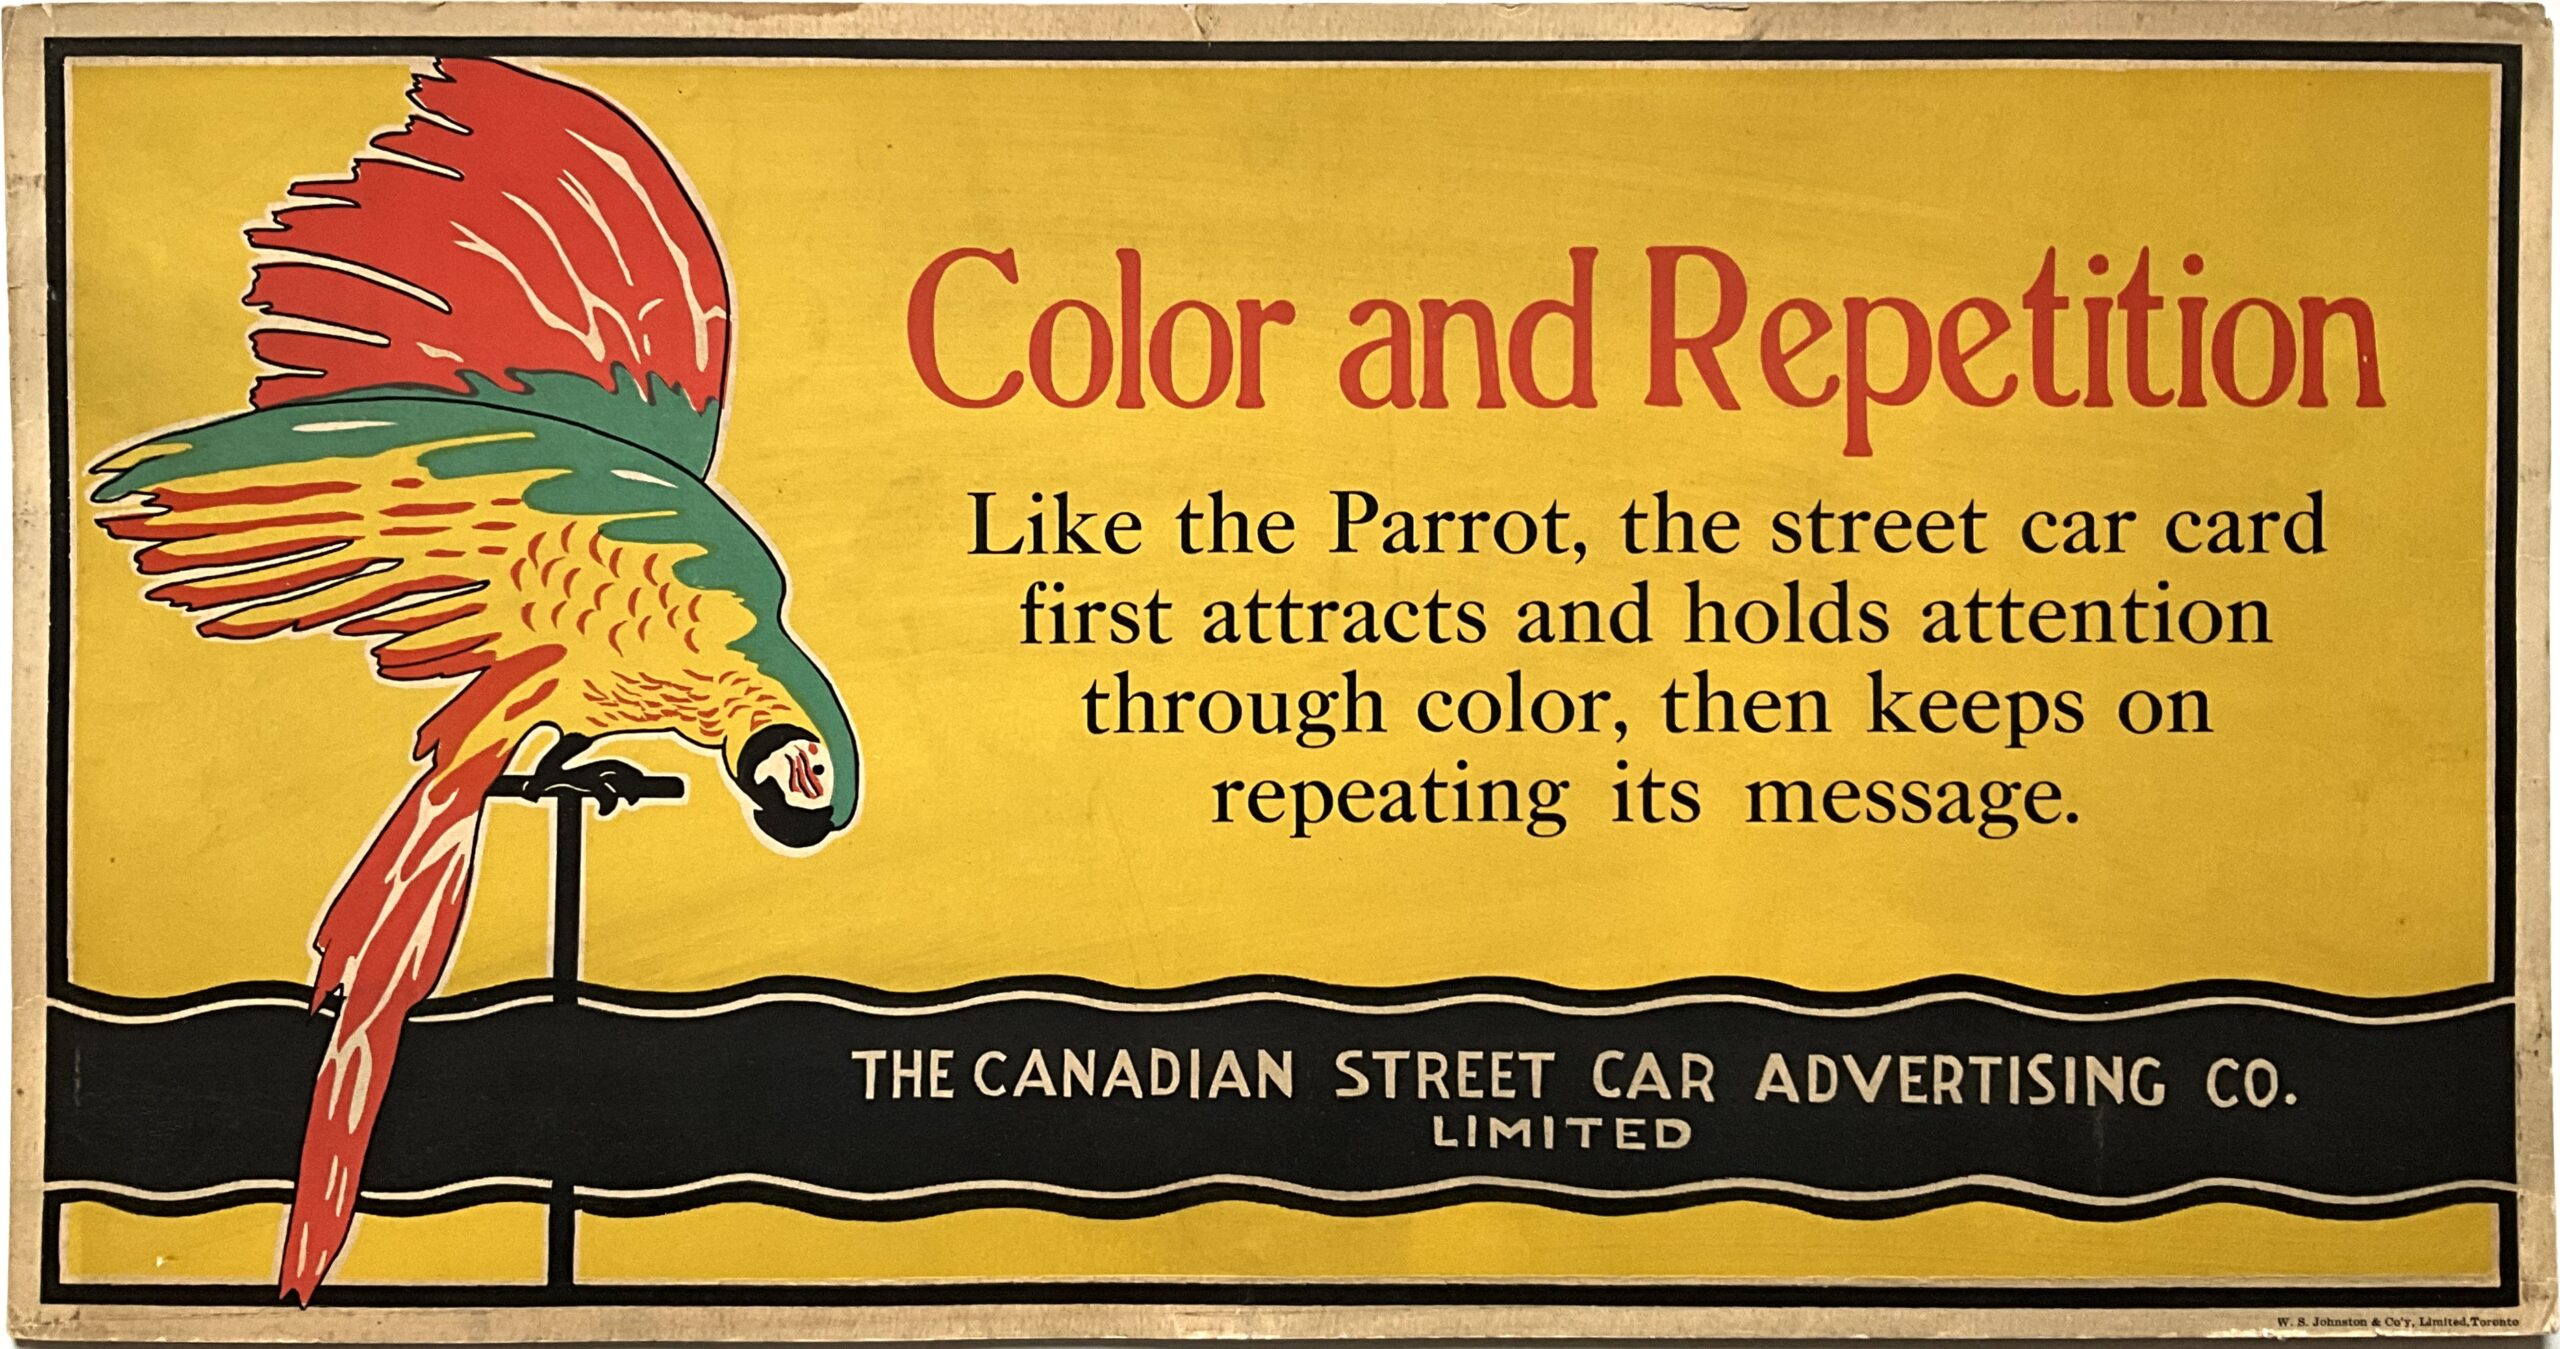 ST57	COLOR AND REPETITION - LIKE THE PARROT, THE STREET CAR CARD FIRST ATTRACTS AND HOLDS ATTENTION